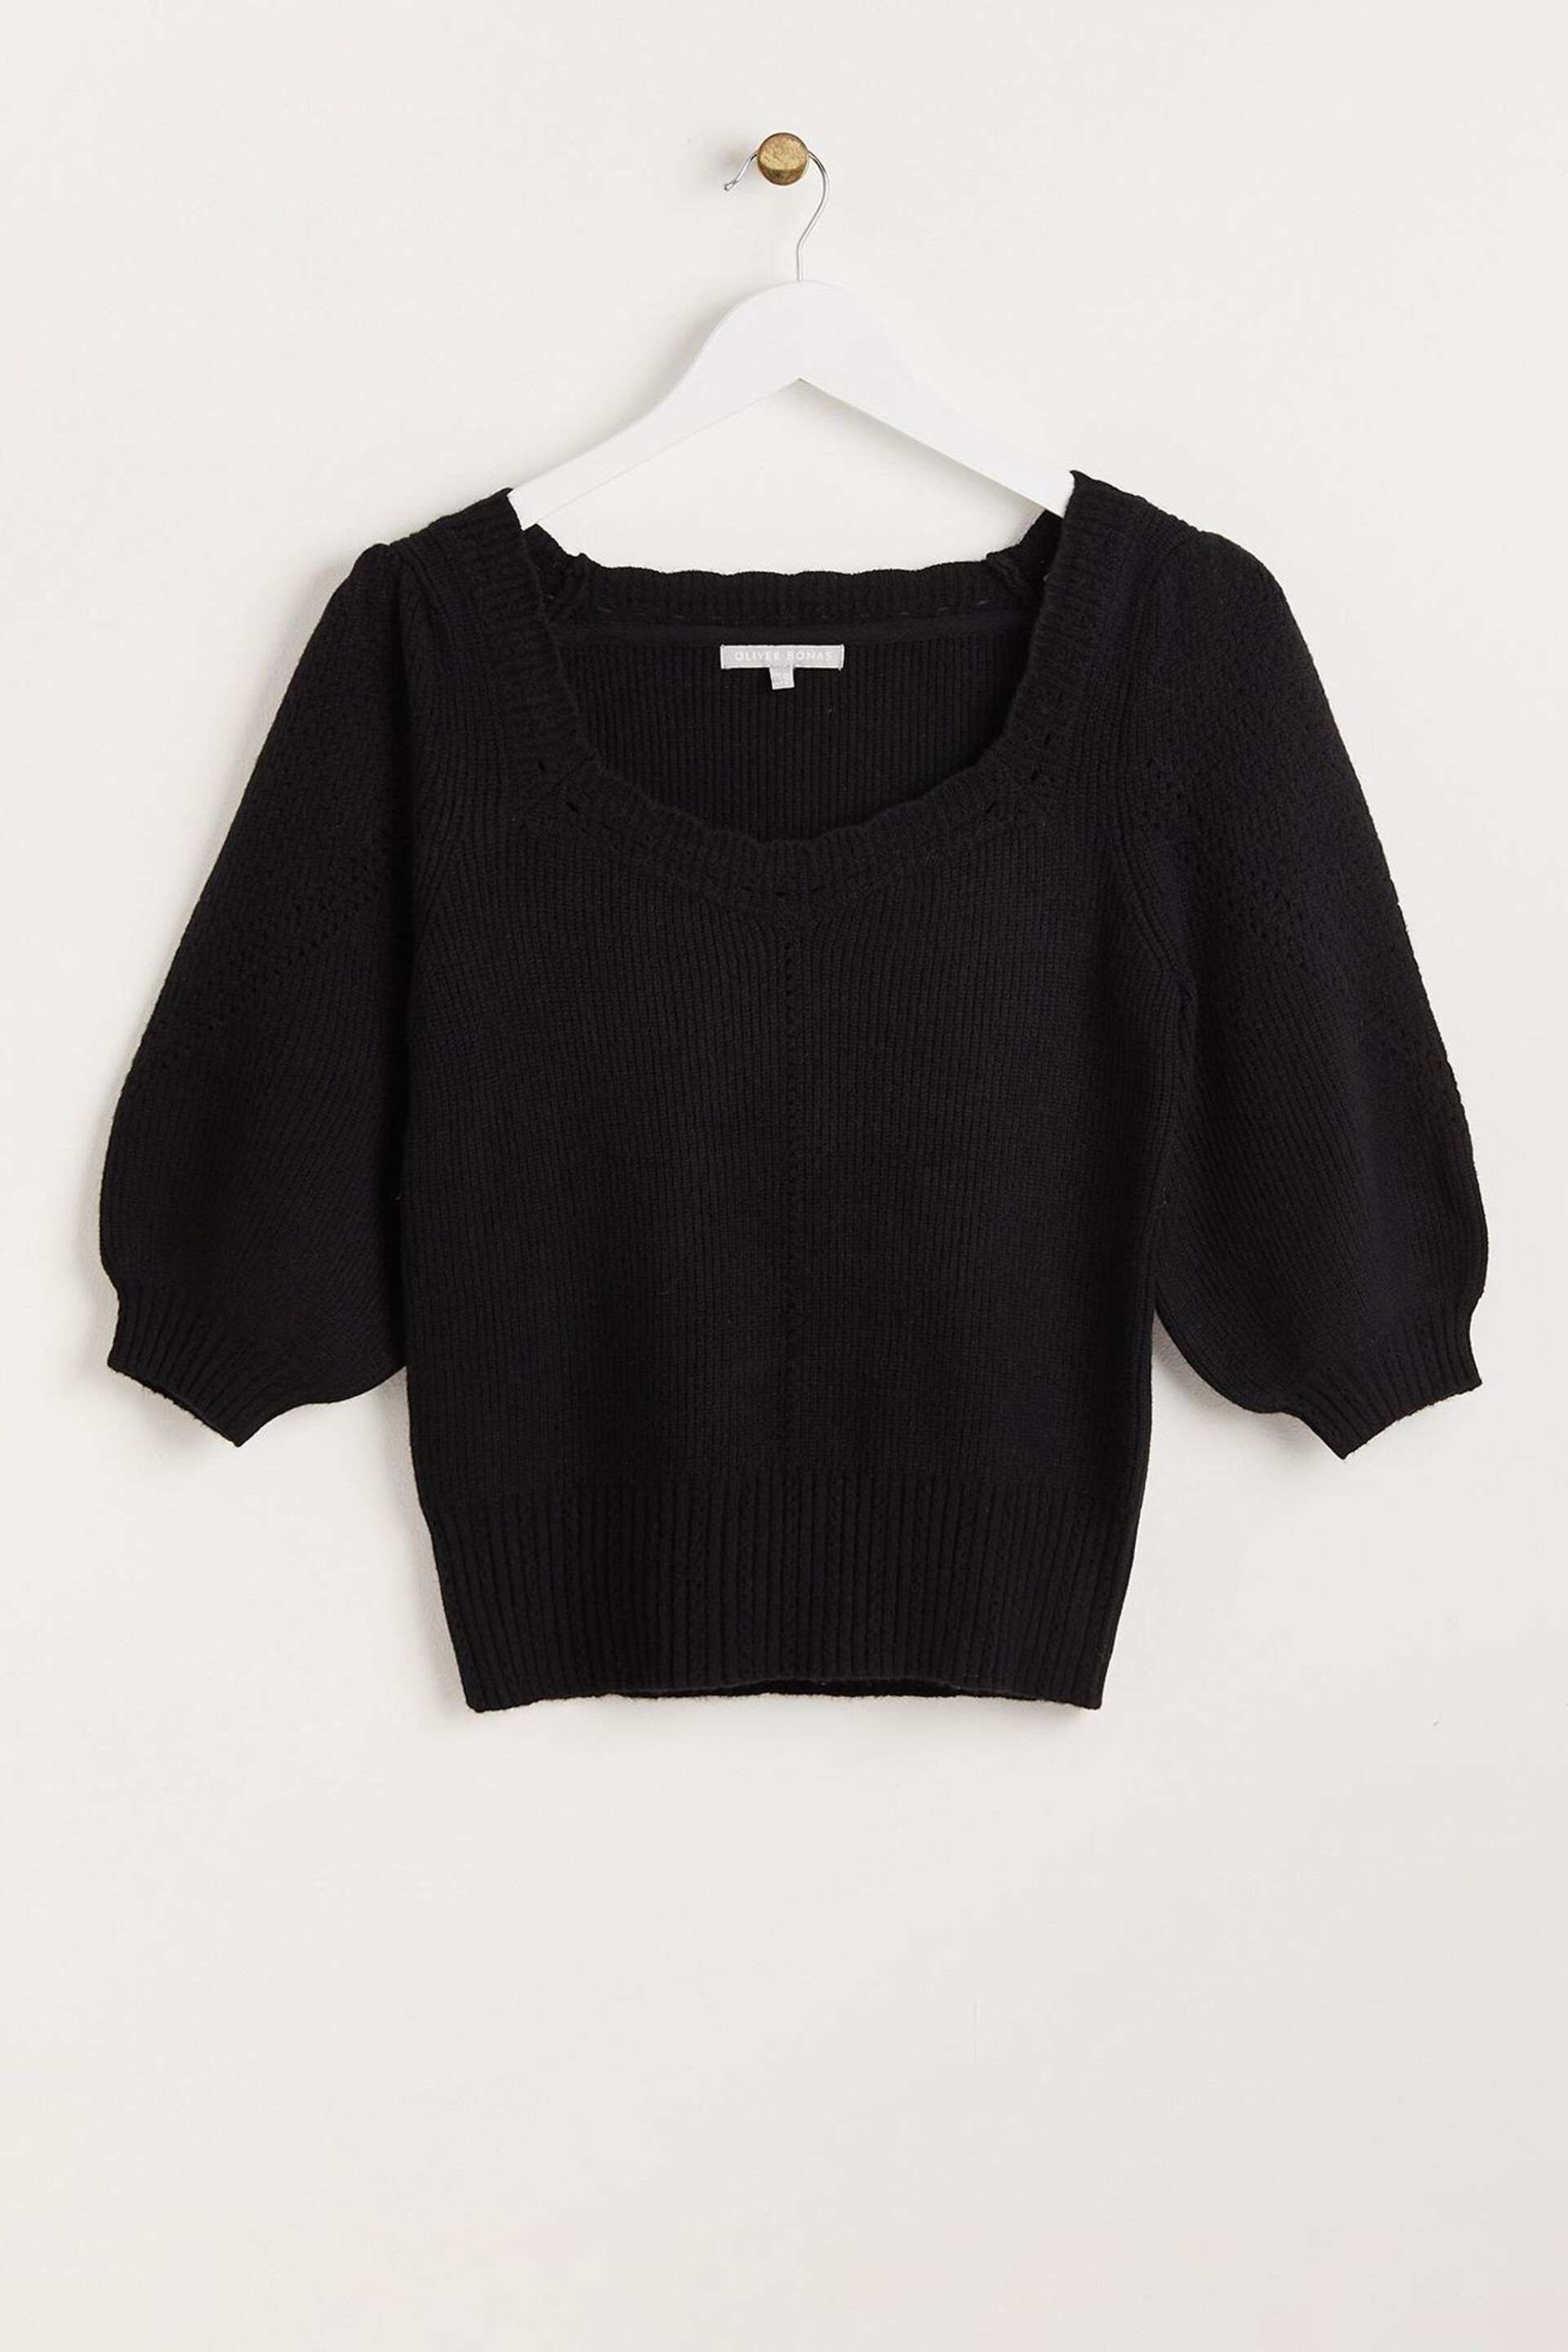 Oliver Bonas Black Scalloped Knitted Crop Top - Image 3 of 7